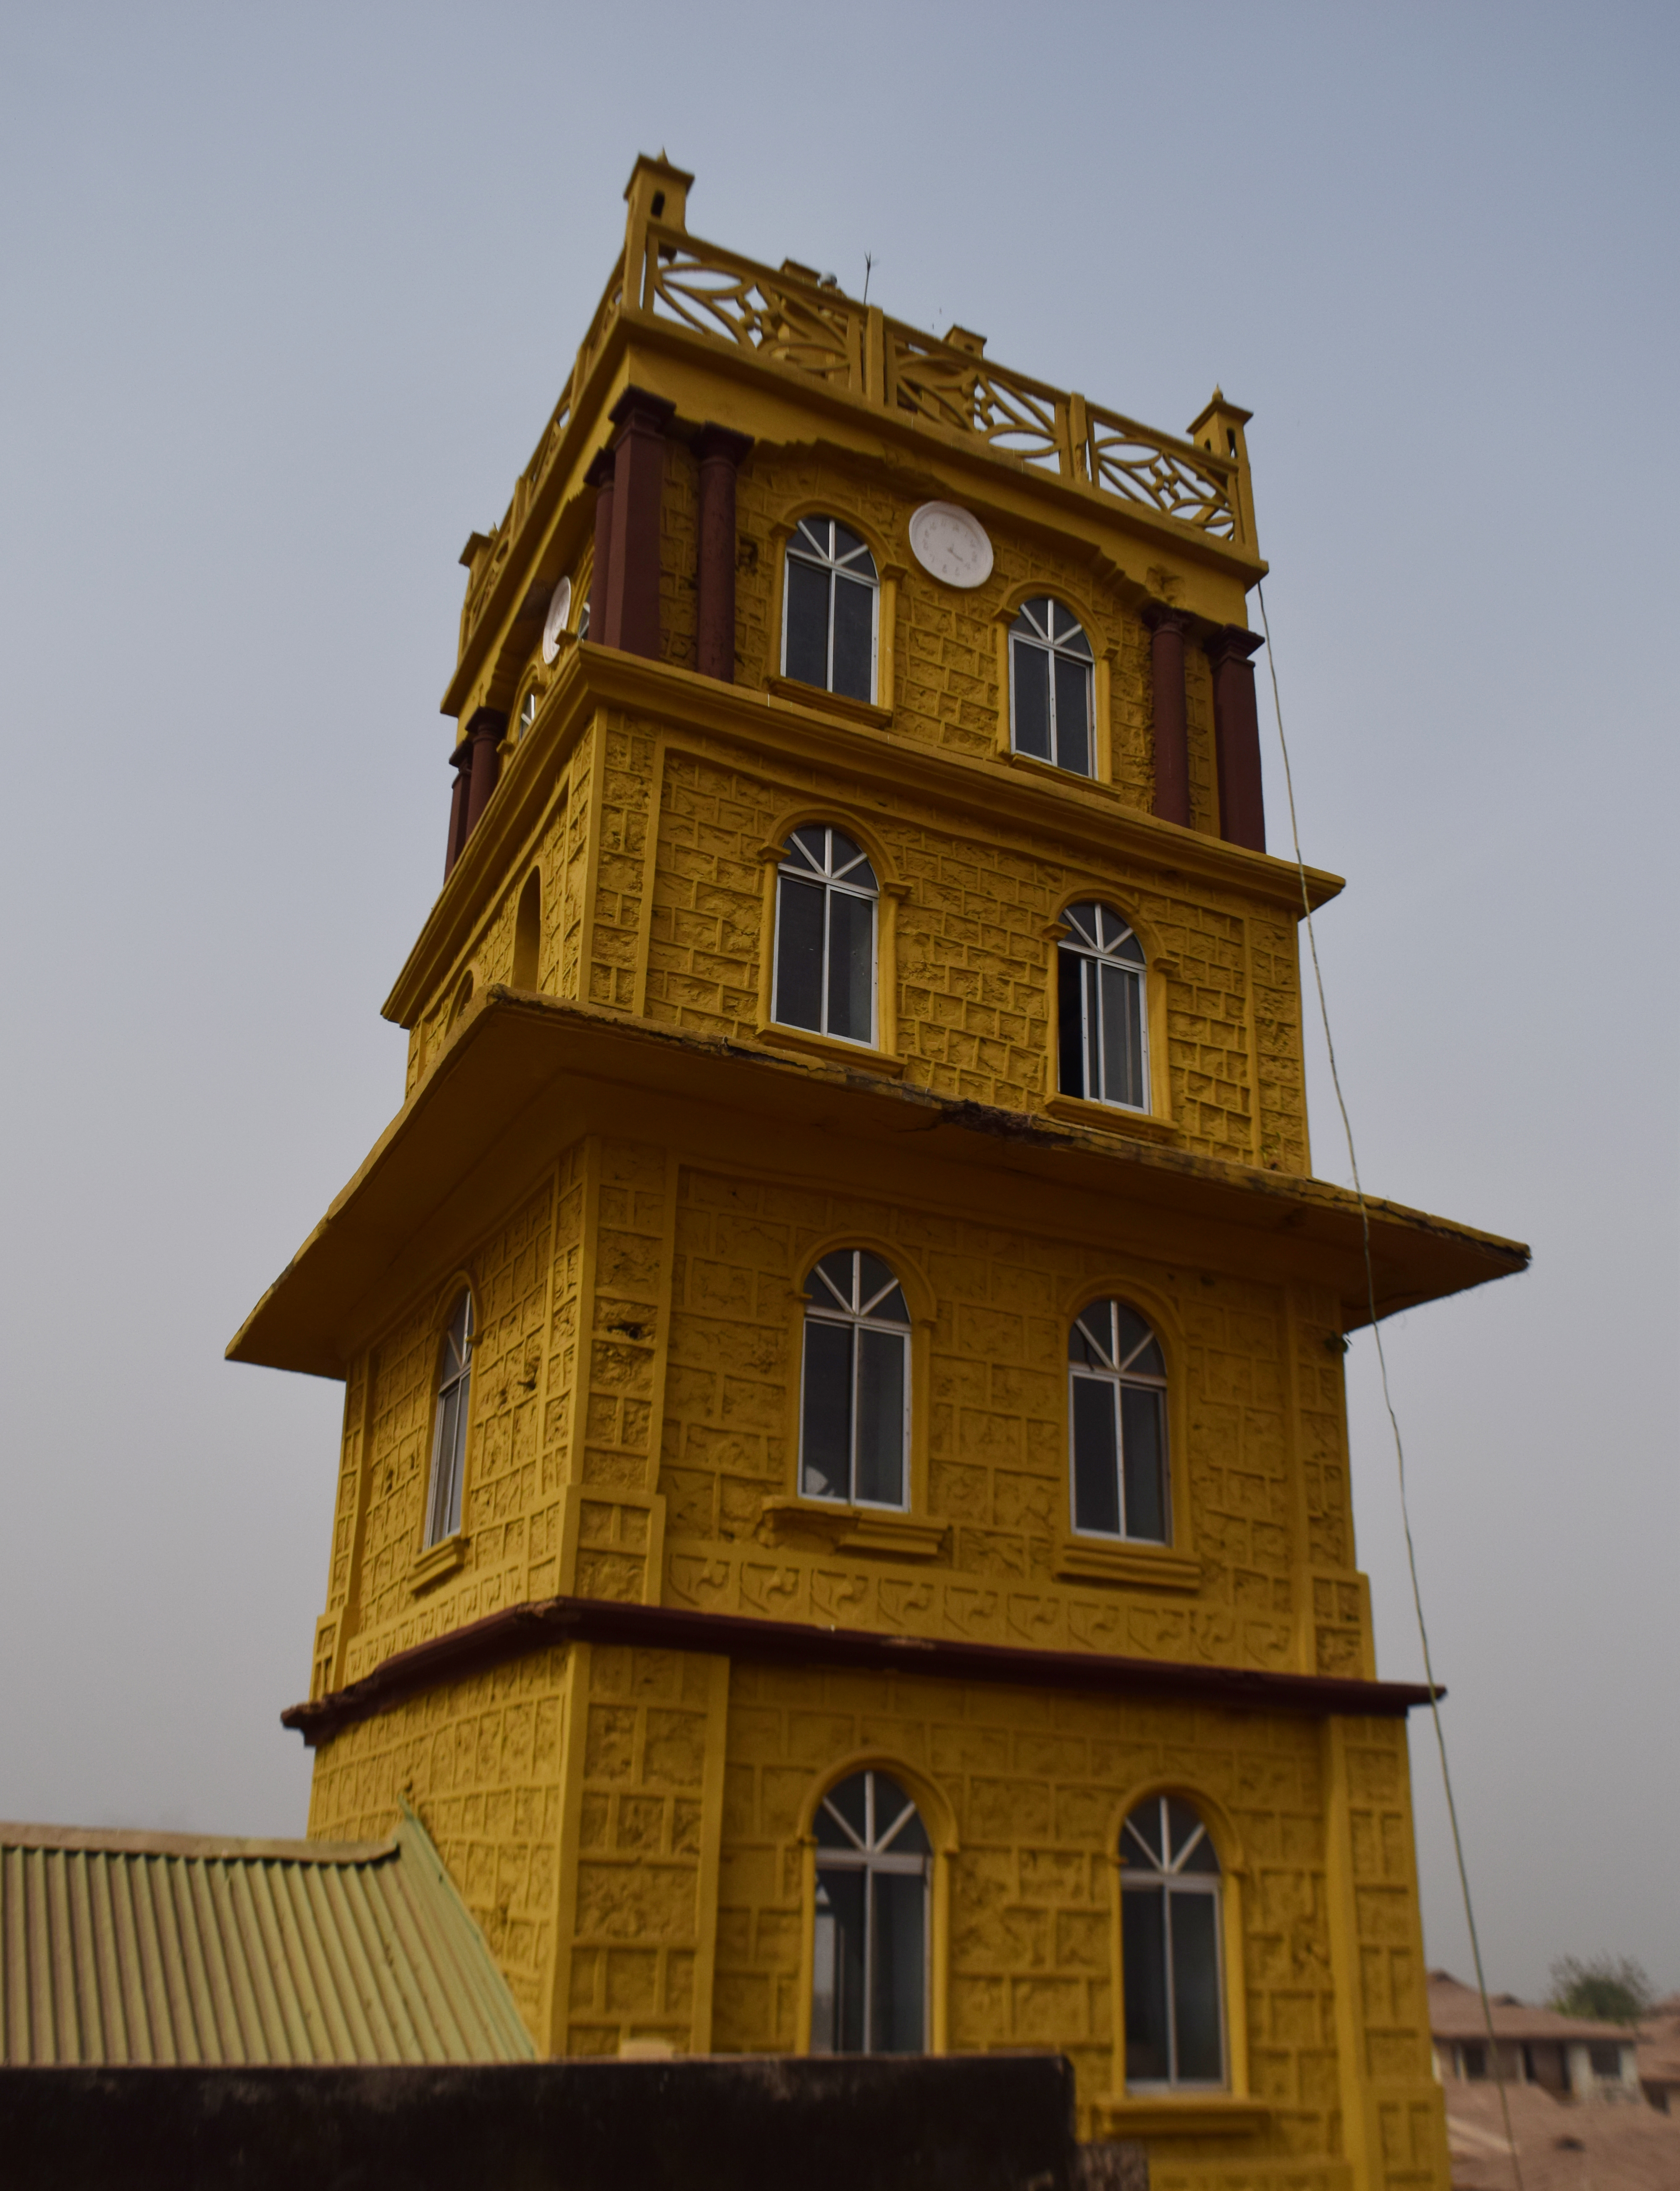 Ode Omu Central Mosque - 15 foot tower